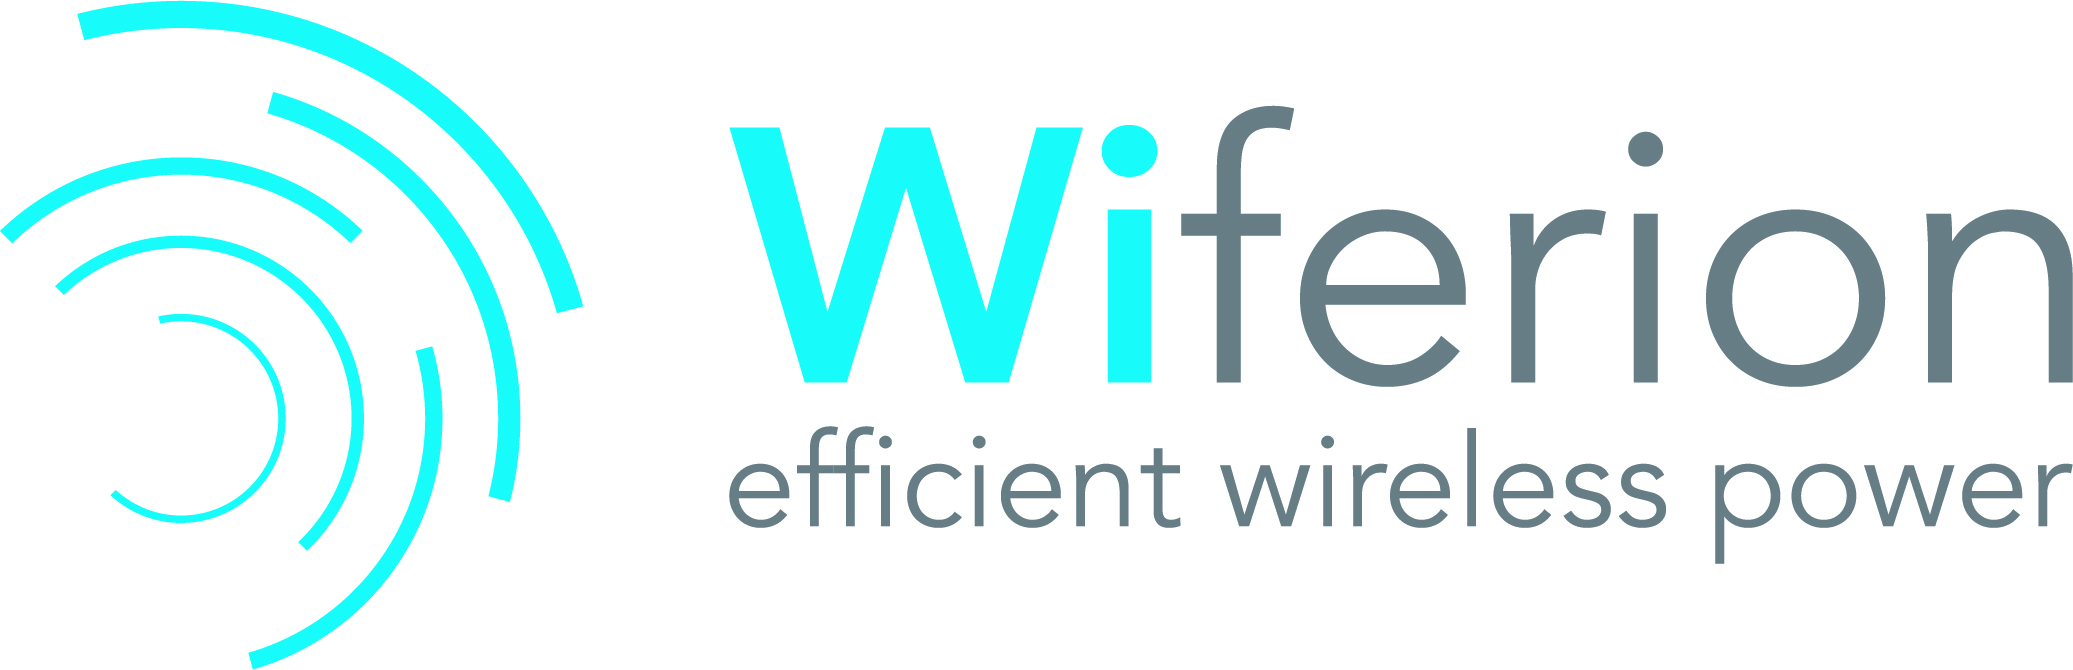 Innovation Award Finalist Wiferion Profile in March Manufacturing Outlook